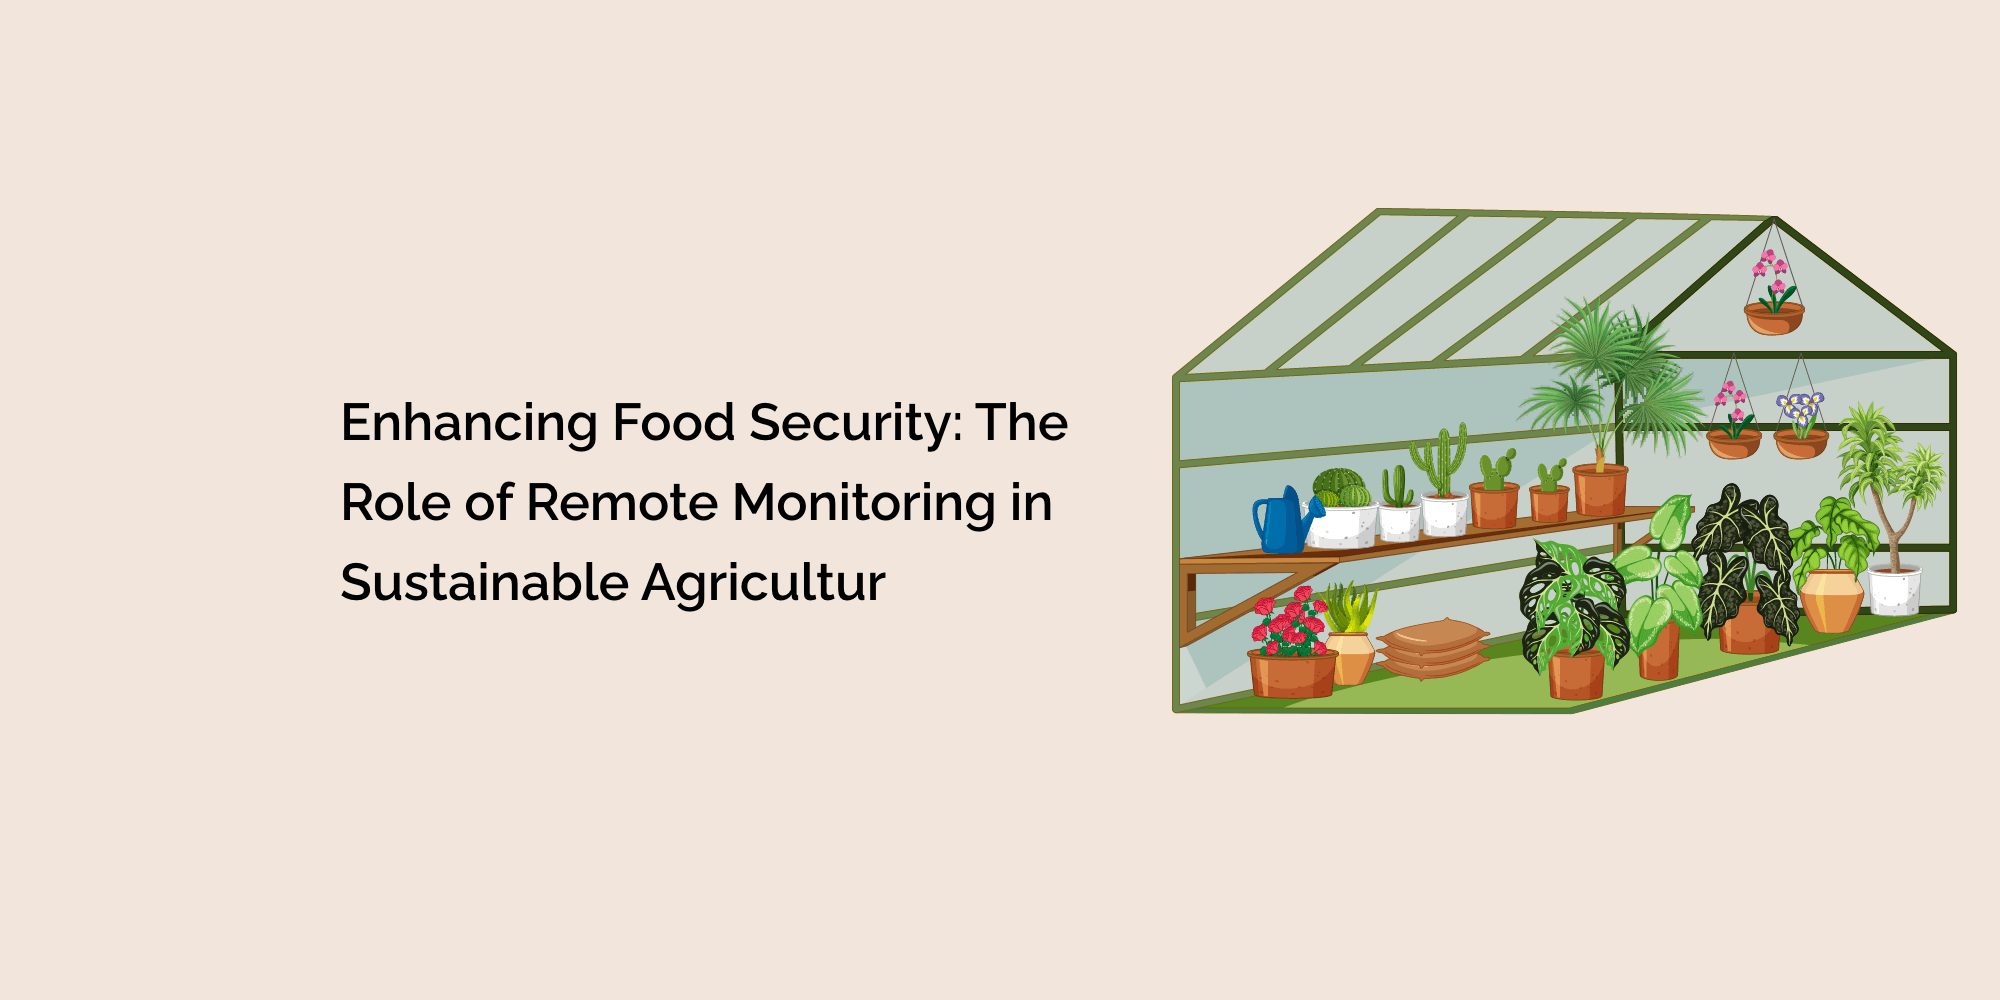 Enhancing Food Security: The Role of Remote Monitoring in Sustainable Agricultur